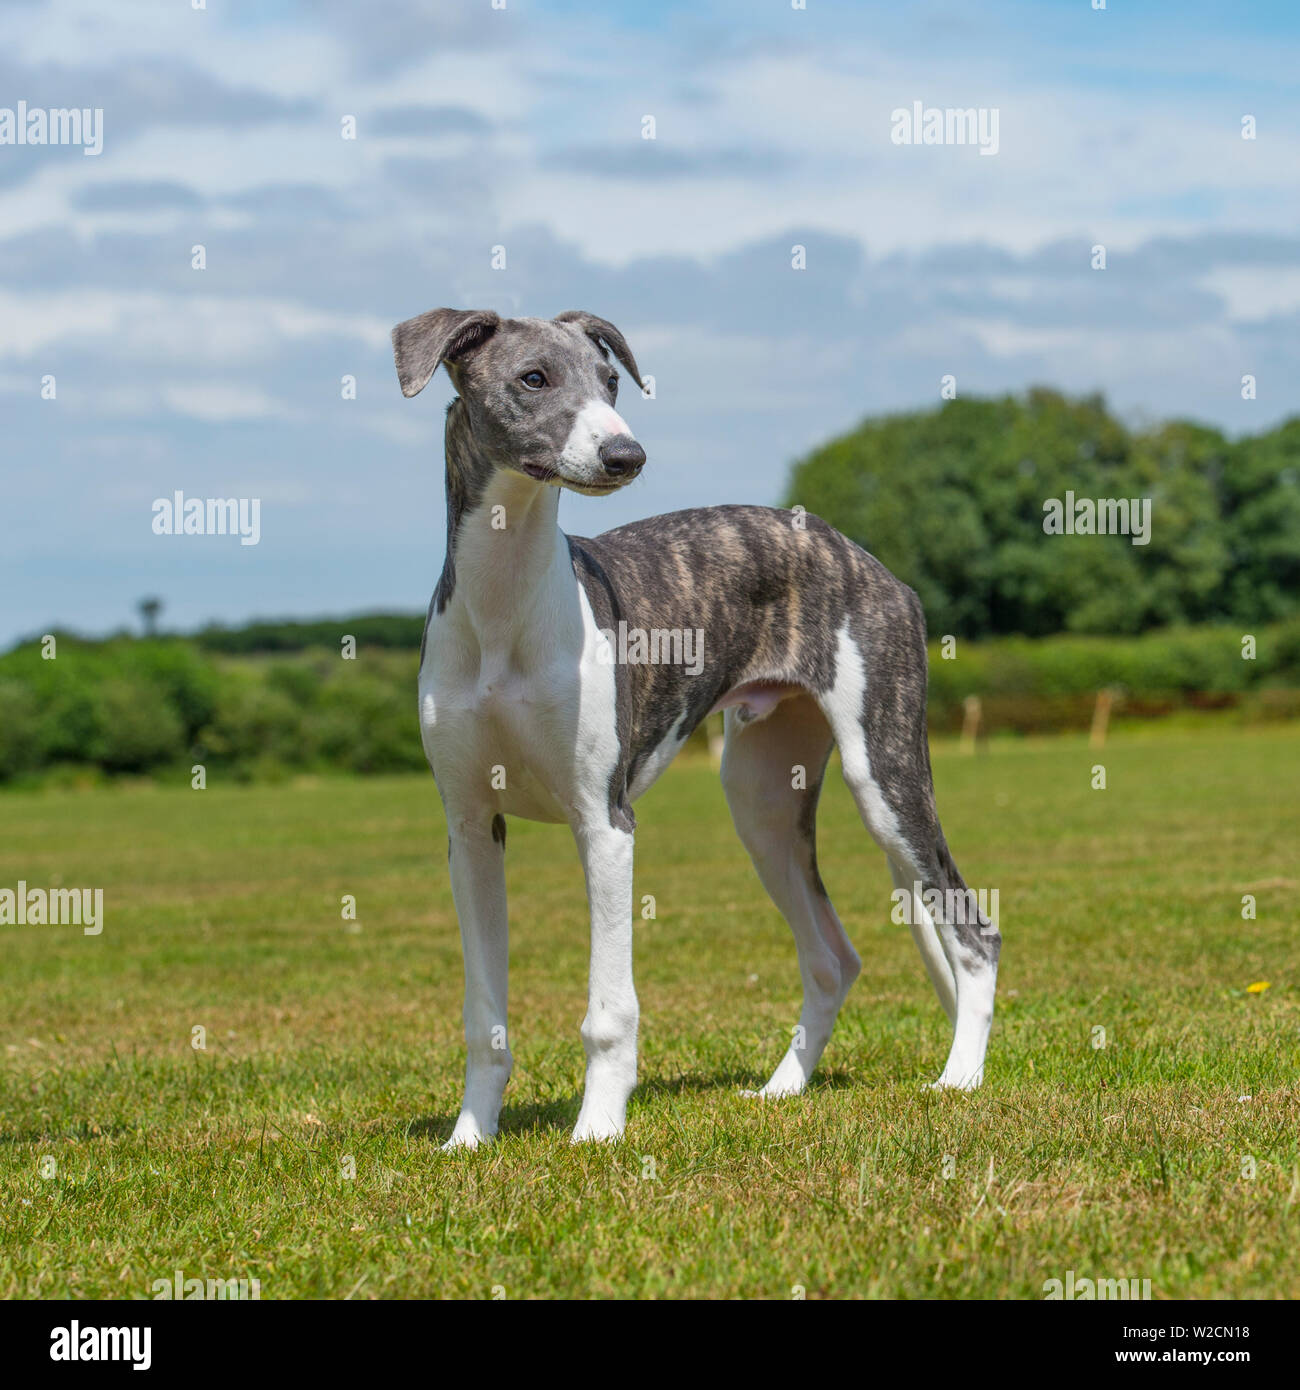 Whippet Puppy High Resolution Stock Photography and Images - Alamy